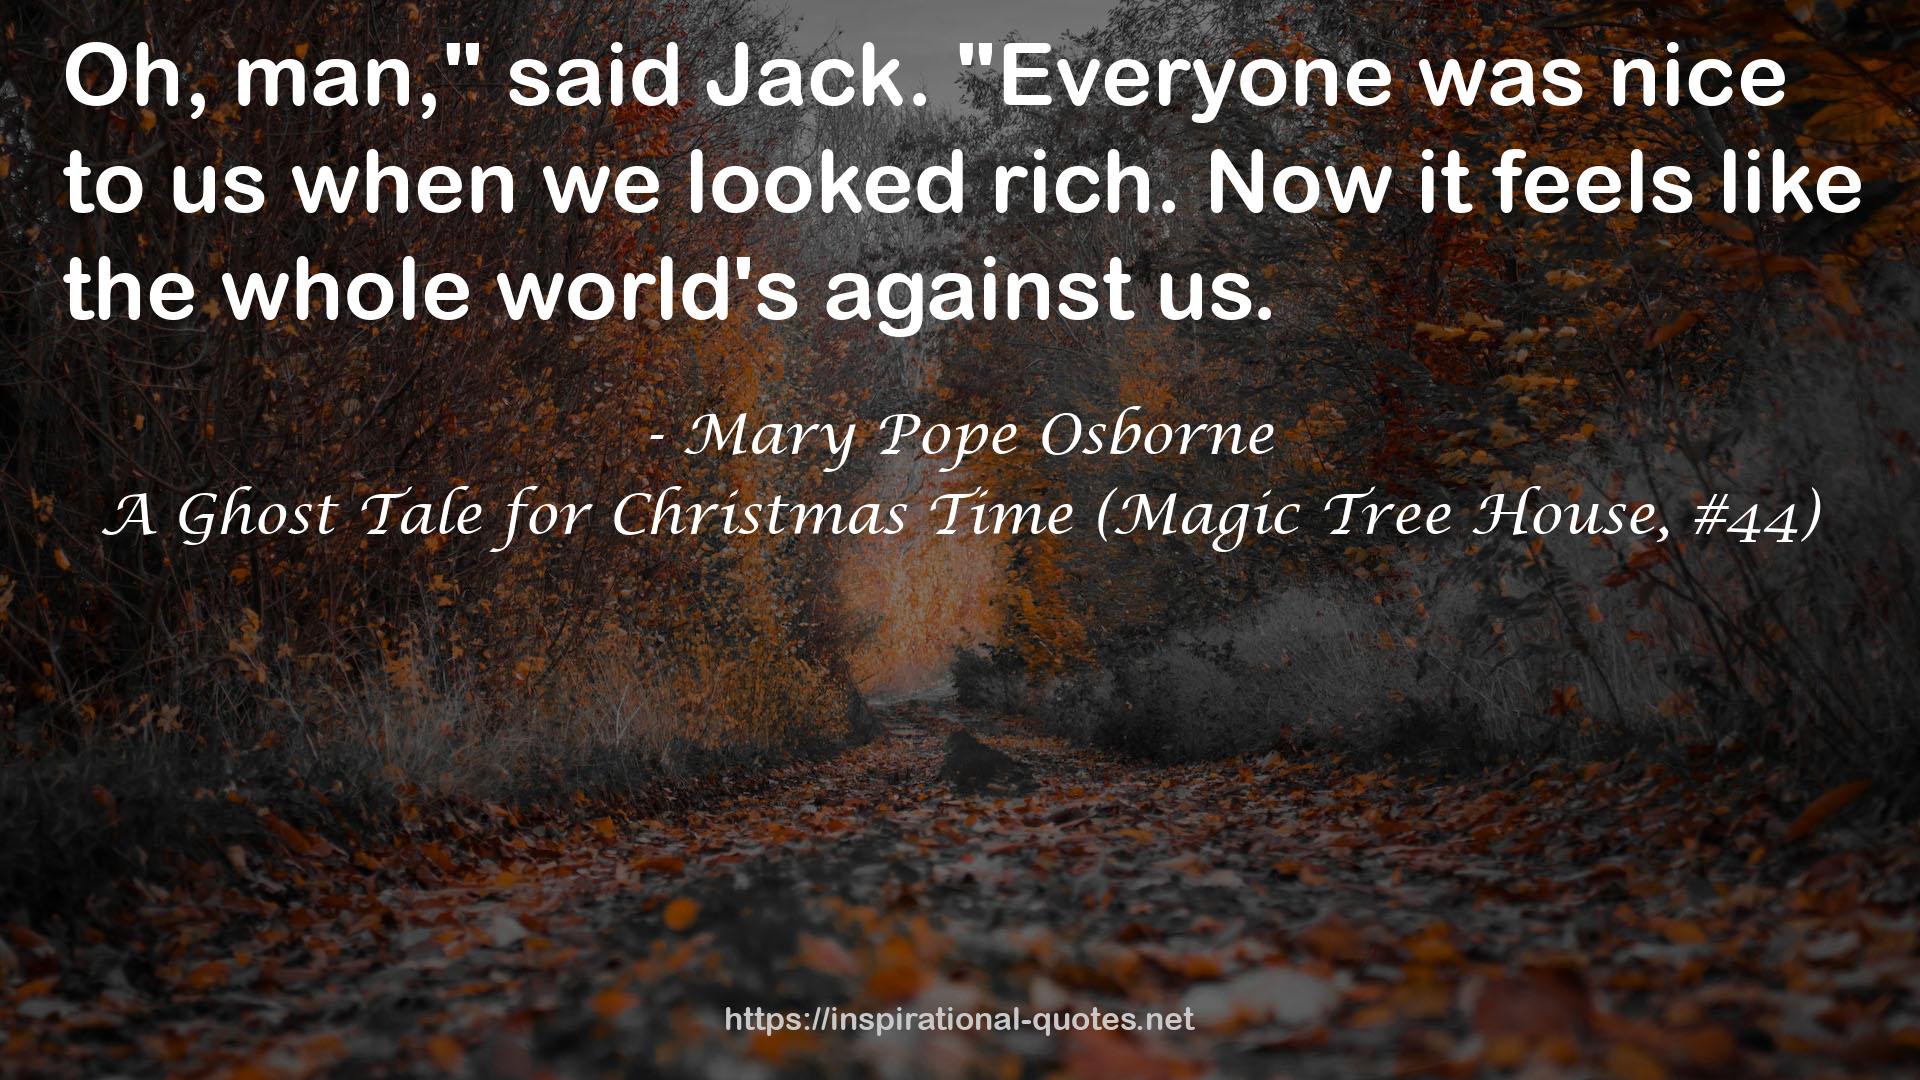 A Ghost Tale for Christmas Time (Magic Tree House, #44) QUOTES